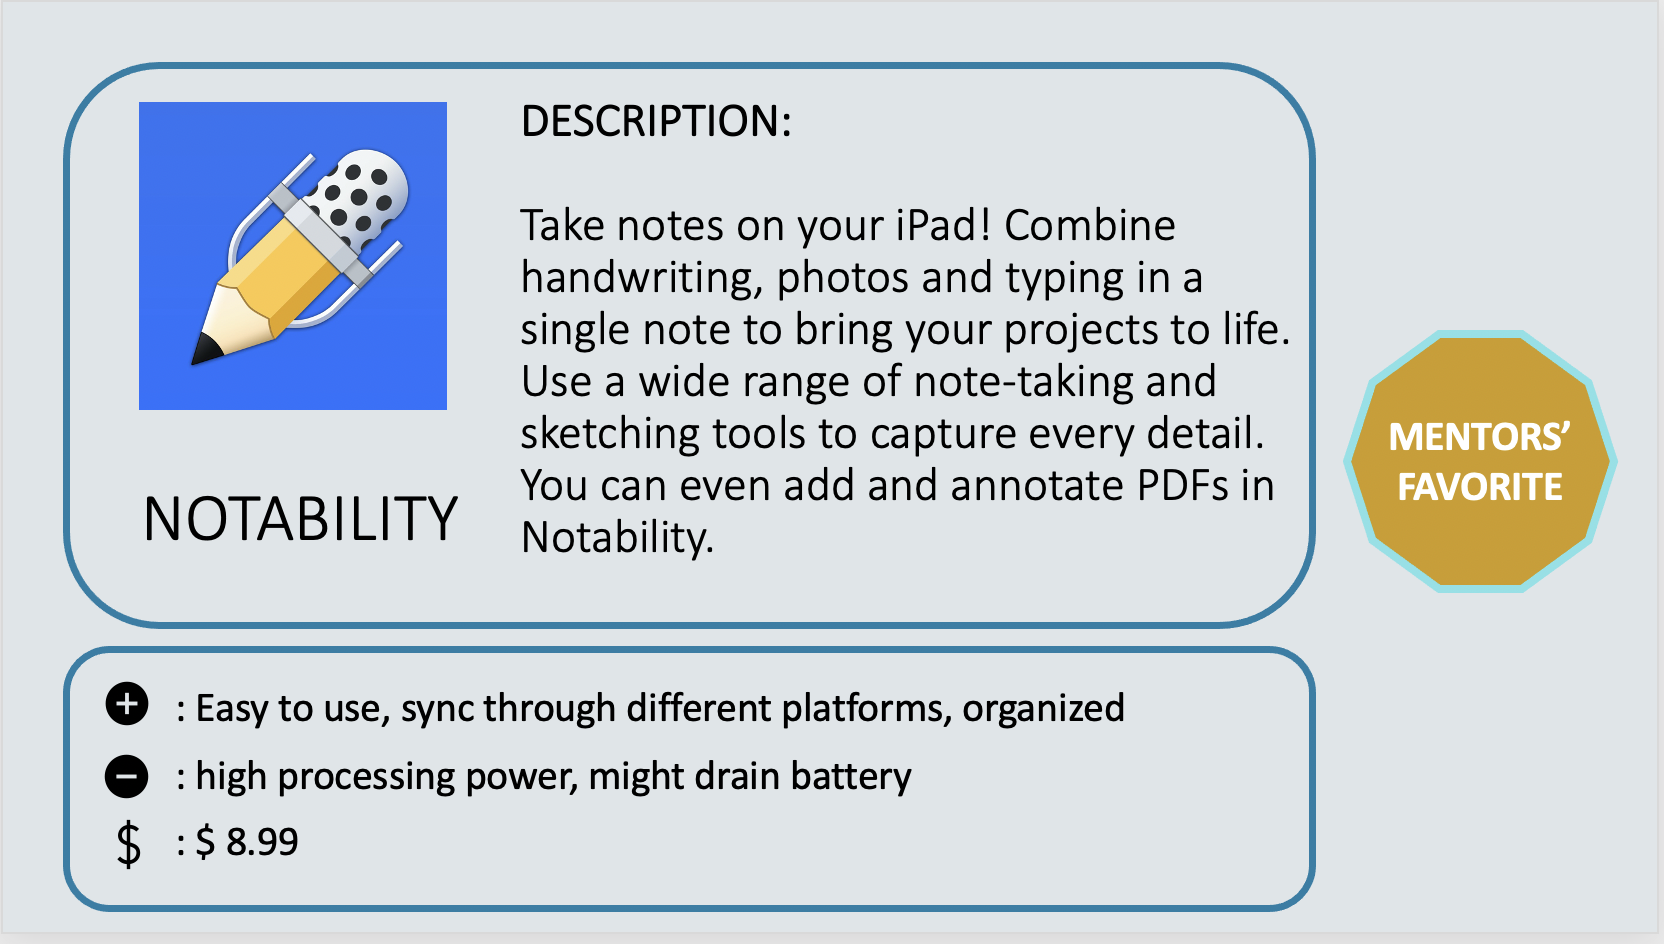 NOTABILITY – MENTOR’S FAVORITE - Take notes on your iPad! Combine handwriting, photos and typing in a single note to bring your projects to life. Use a wide range of note-taking and sketching tools to capture every detail. You can even add and annotate PDFs in Notability. Pluses: Easy to use, sync through different platforms, organized. Negatives: high processing power, might drain battery. Cost: $ 8.99